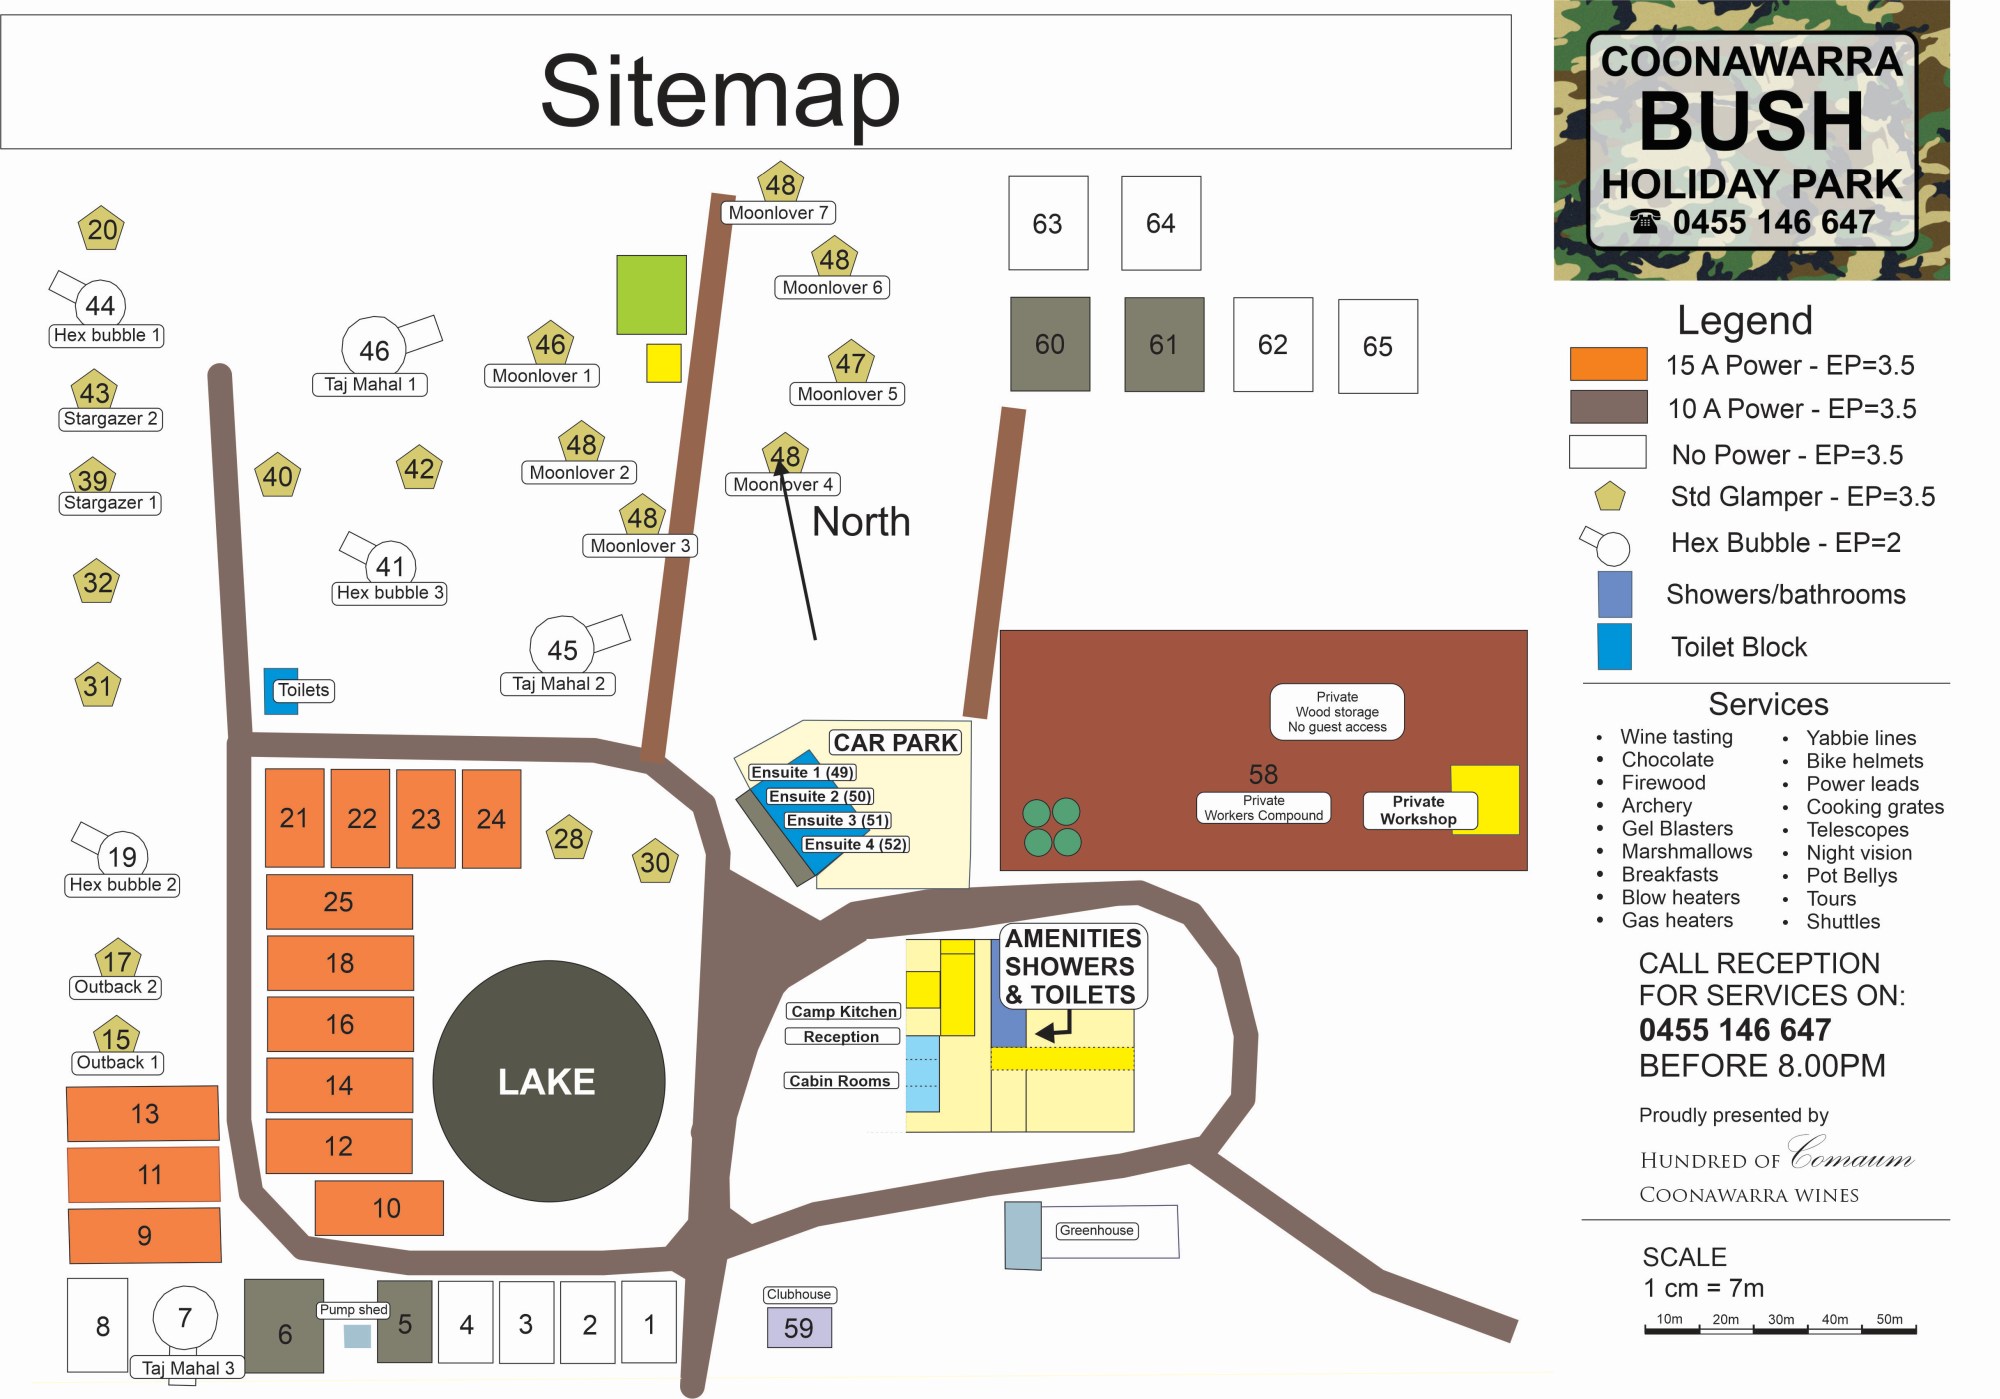 Our sitemap